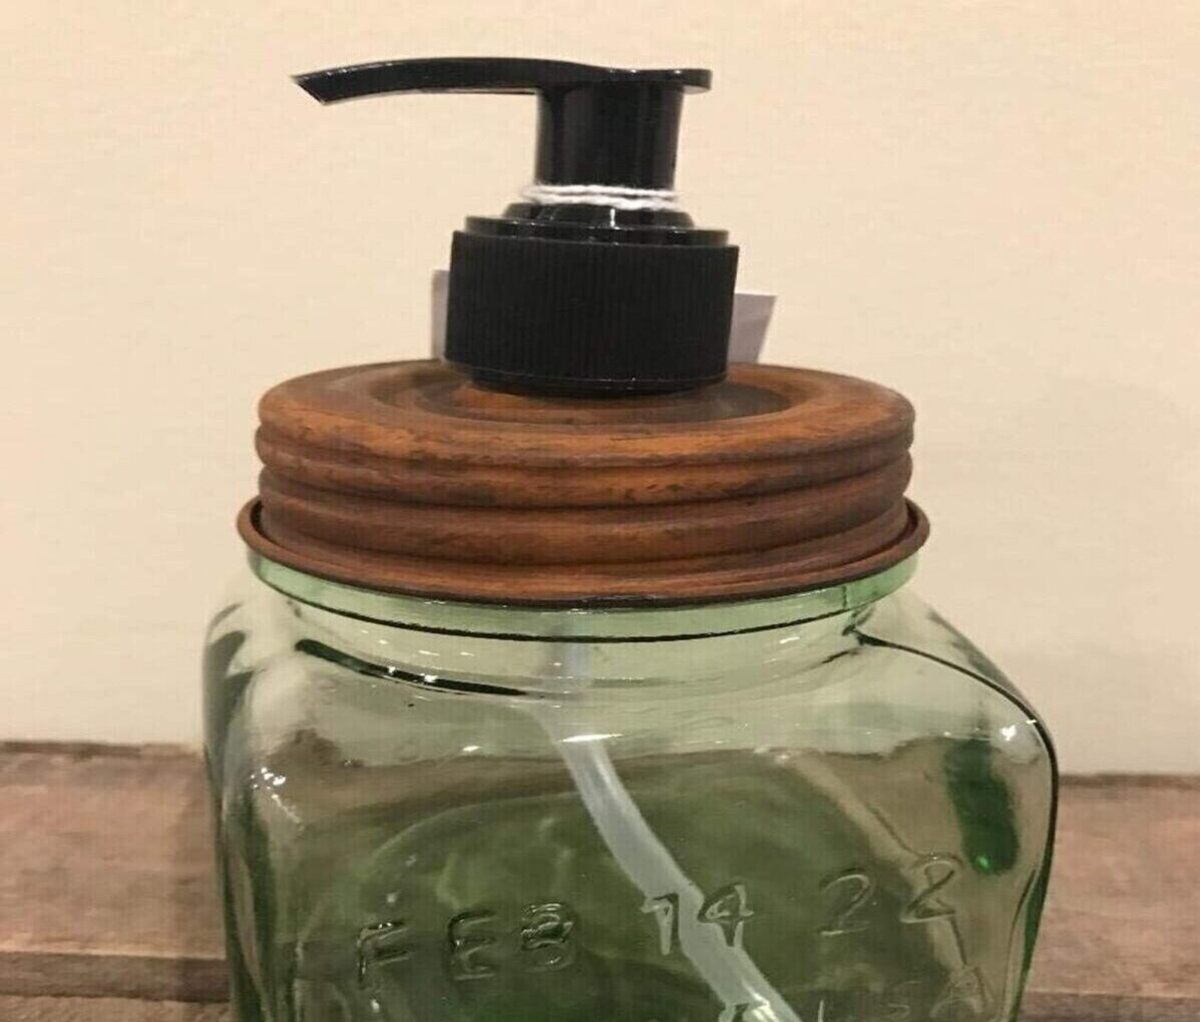 How To Remove Rust From Soap Dispenser